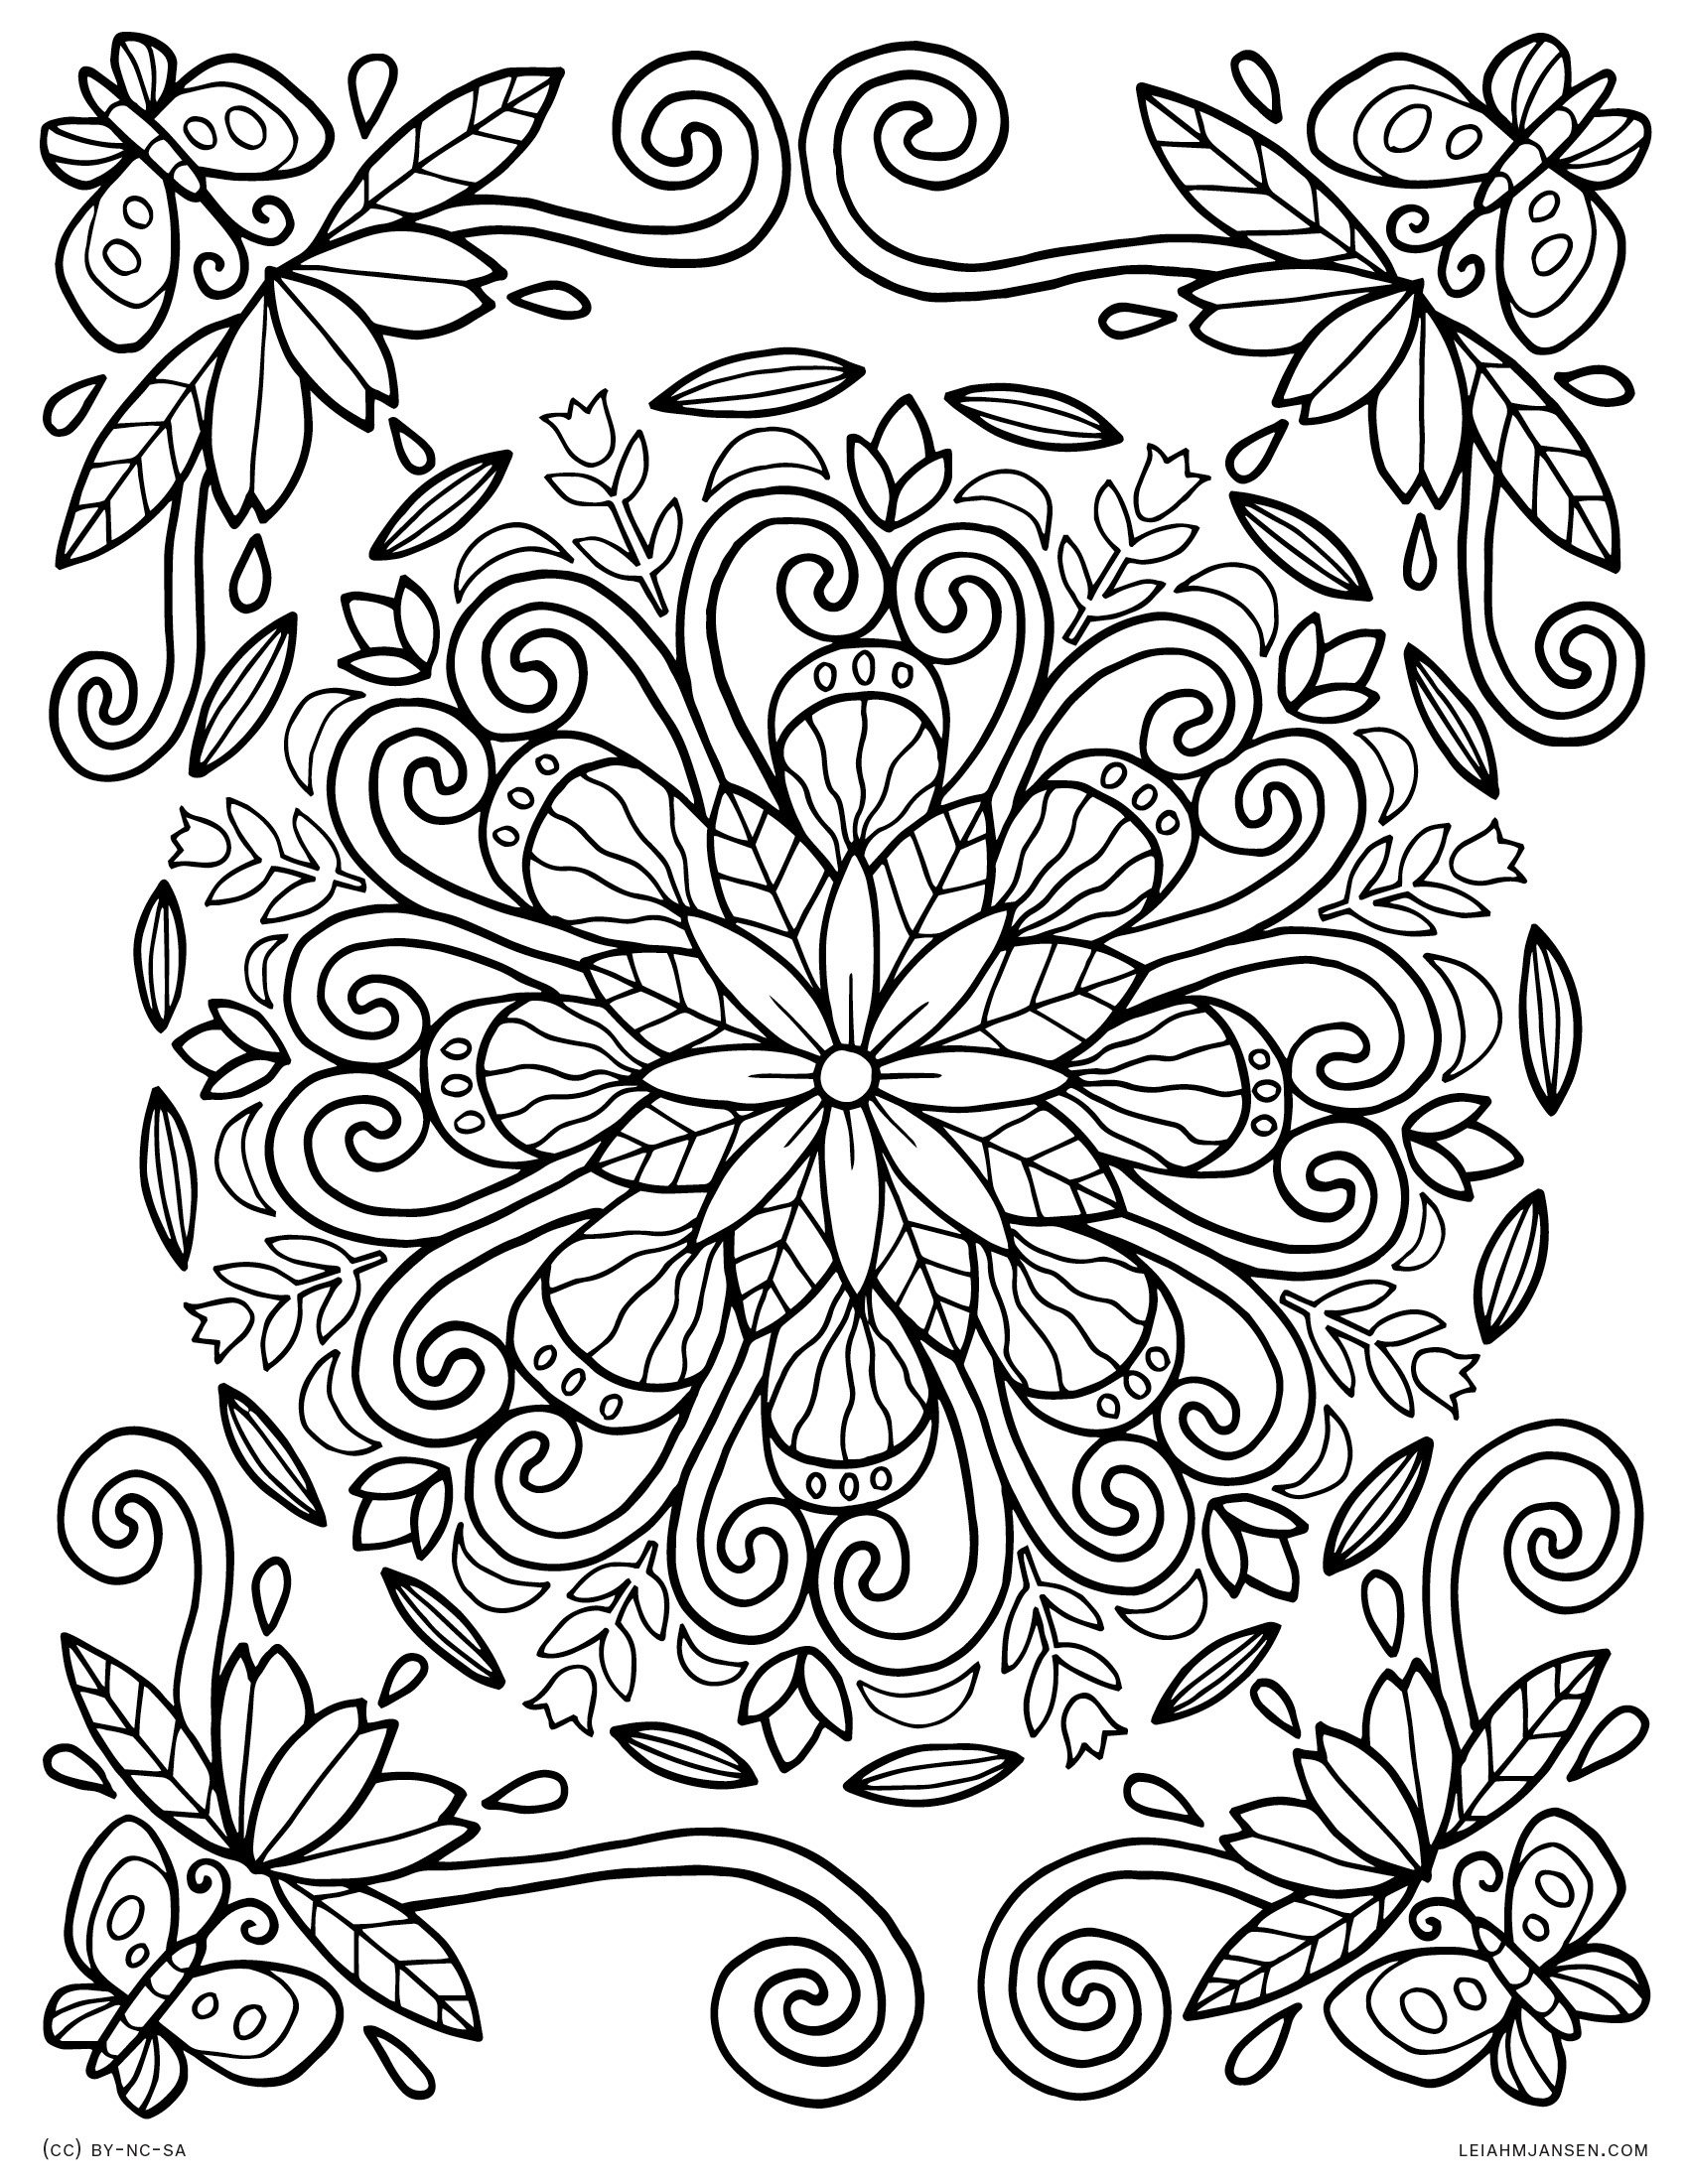 Coloring Pages - Free Printable Coloring Pages